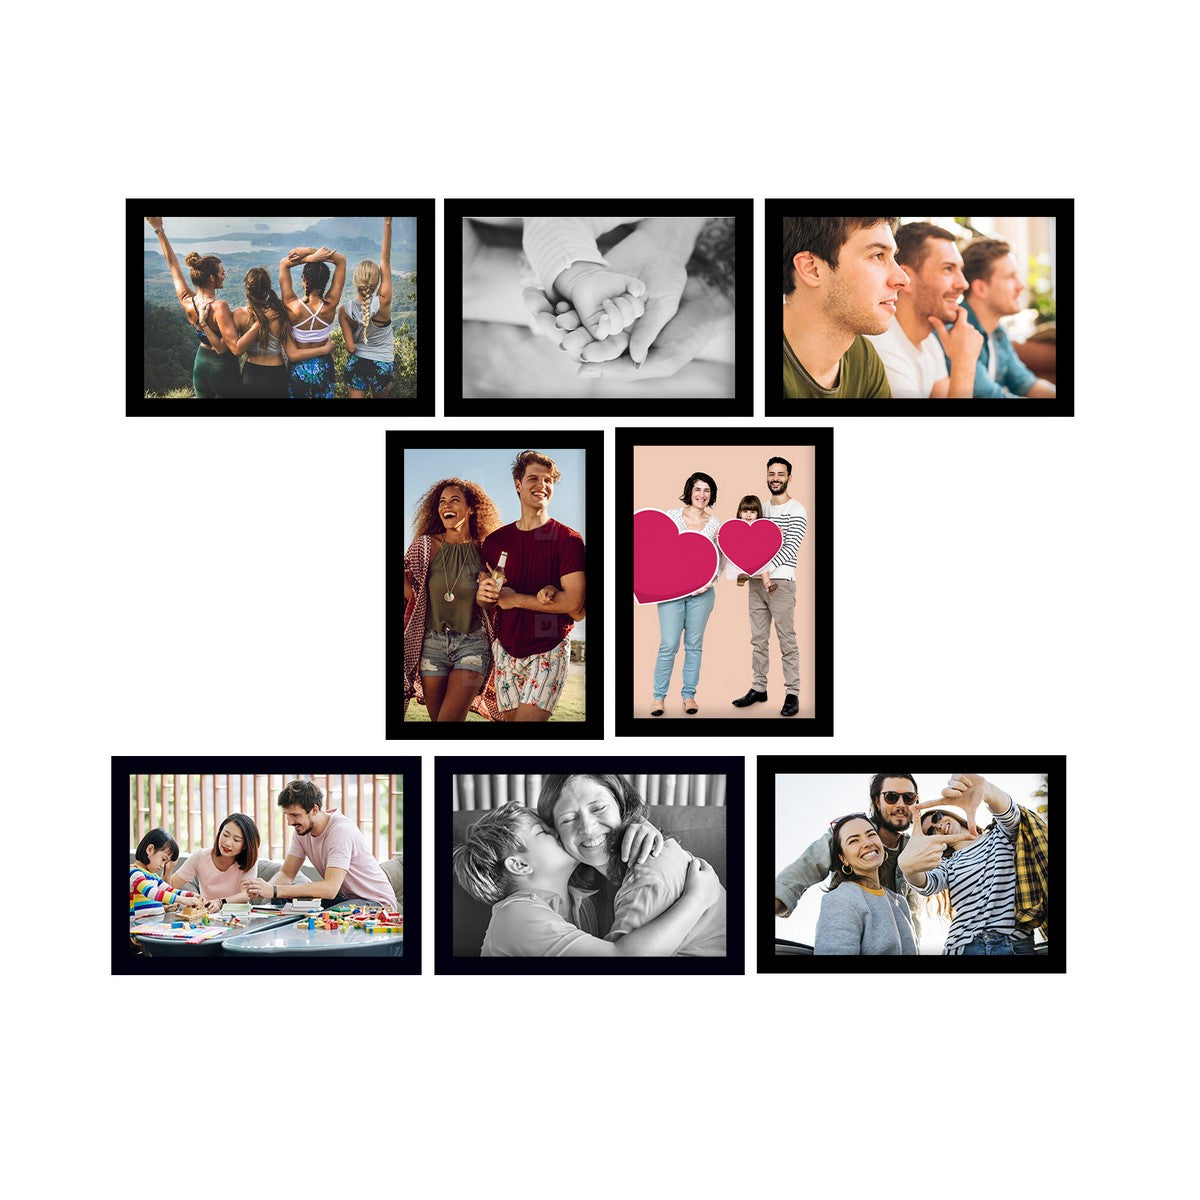 Memory Wall Collage Photo Frame - Set of 8 Photo Frames for 8 Photos of 5"x7"